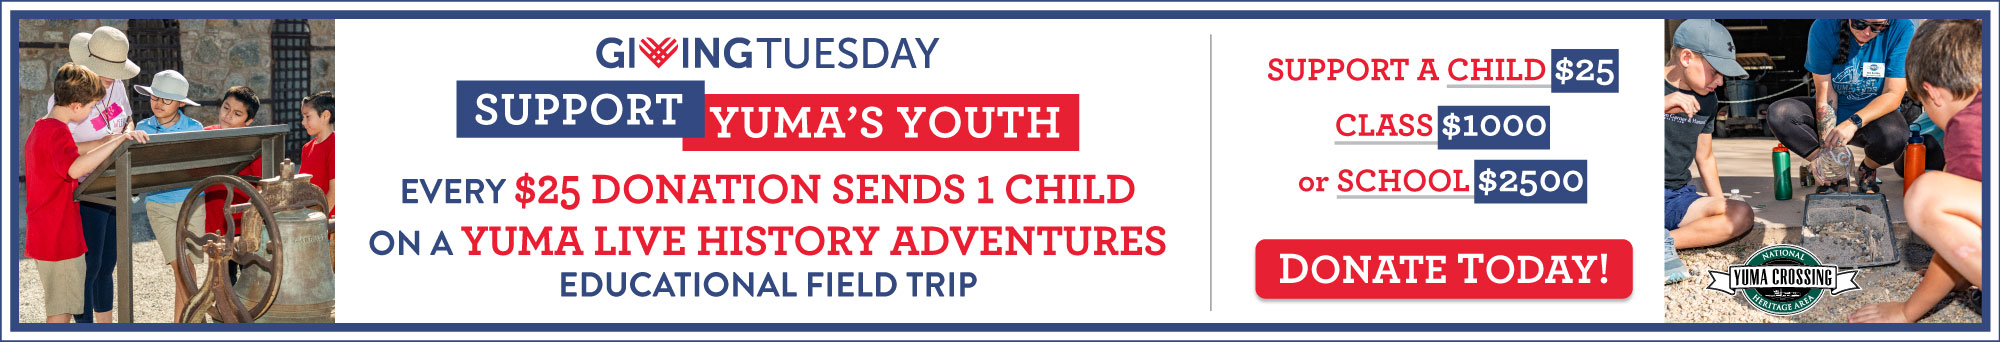 Giving Tuesday: Every $25 donation sends a child on a Yuma Live History Adventures educational fieldtrip